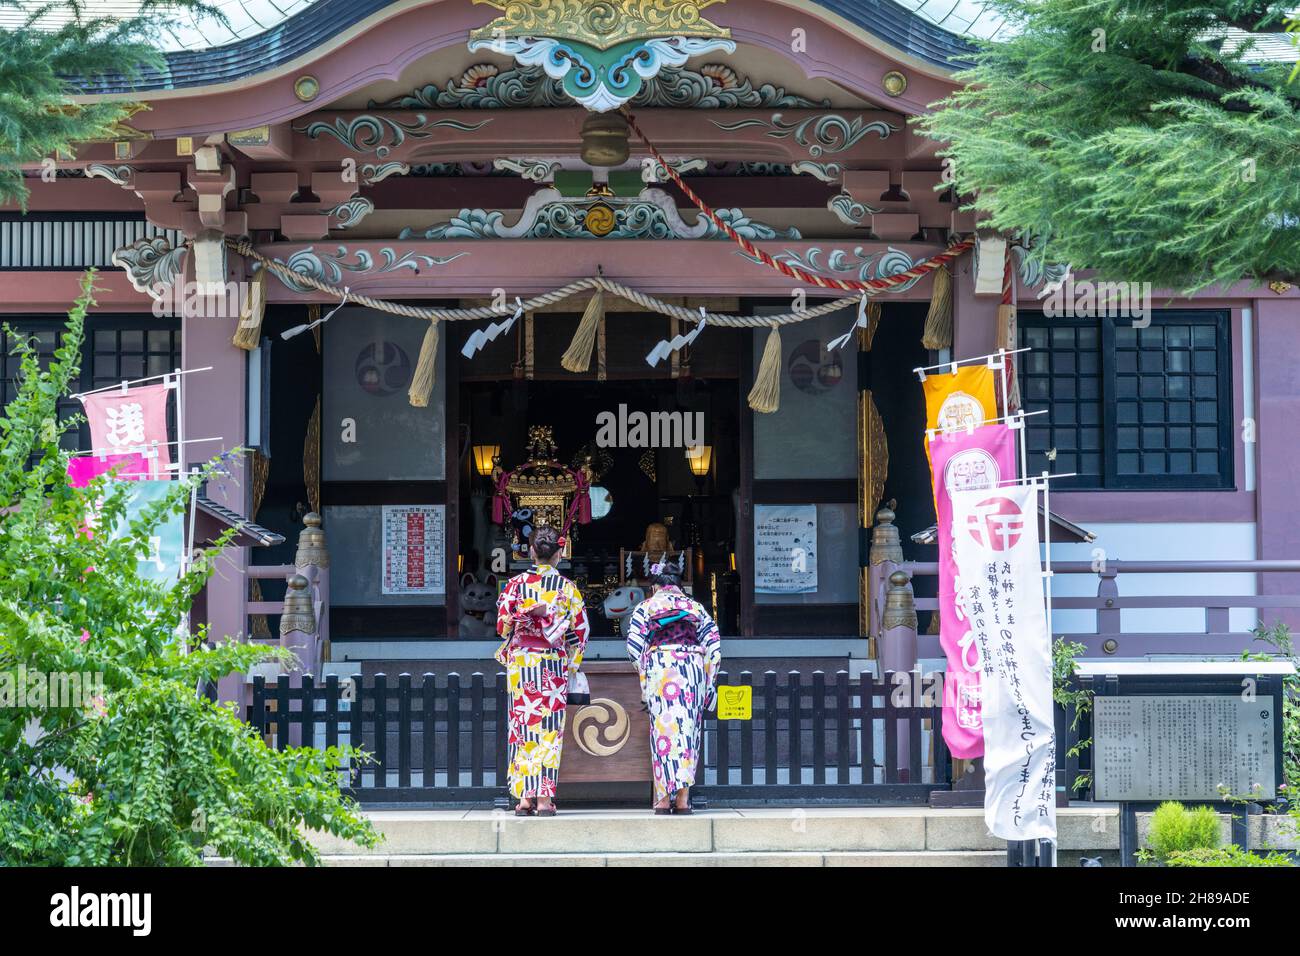 Japanese women dressed in kimono offer prayers at the Imado Jinja Shrine, a Shinto shrine dedicated finding love in Asakusa, Tokyo, Japan. The temple is known for the “Maneki Neko” or the “Beckoning Lucky Cat” figurines. Stock Photo